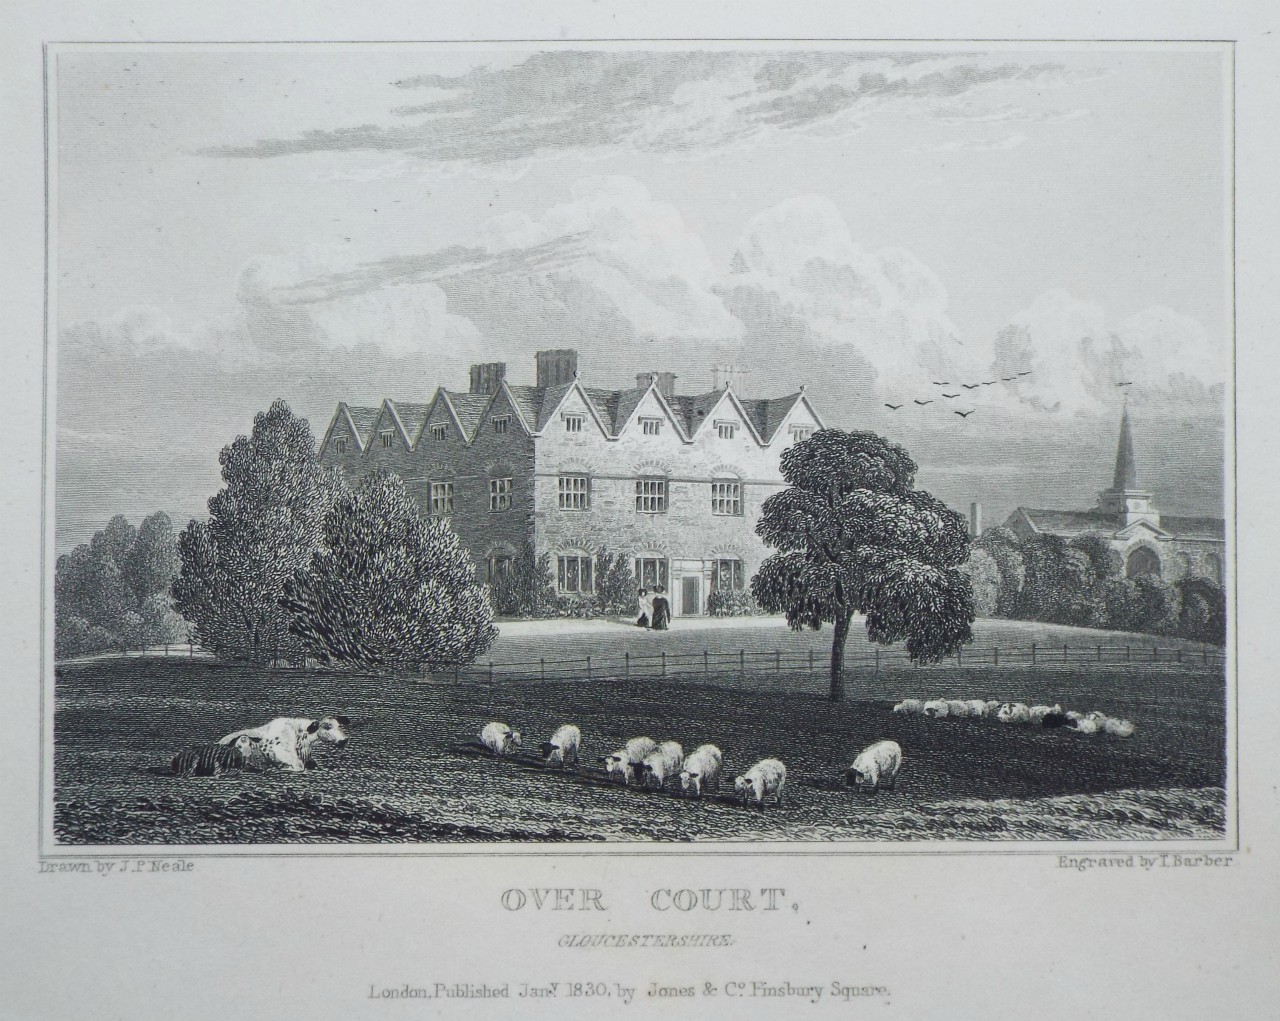 Print - Over Court, Gloucestershire. - Barber